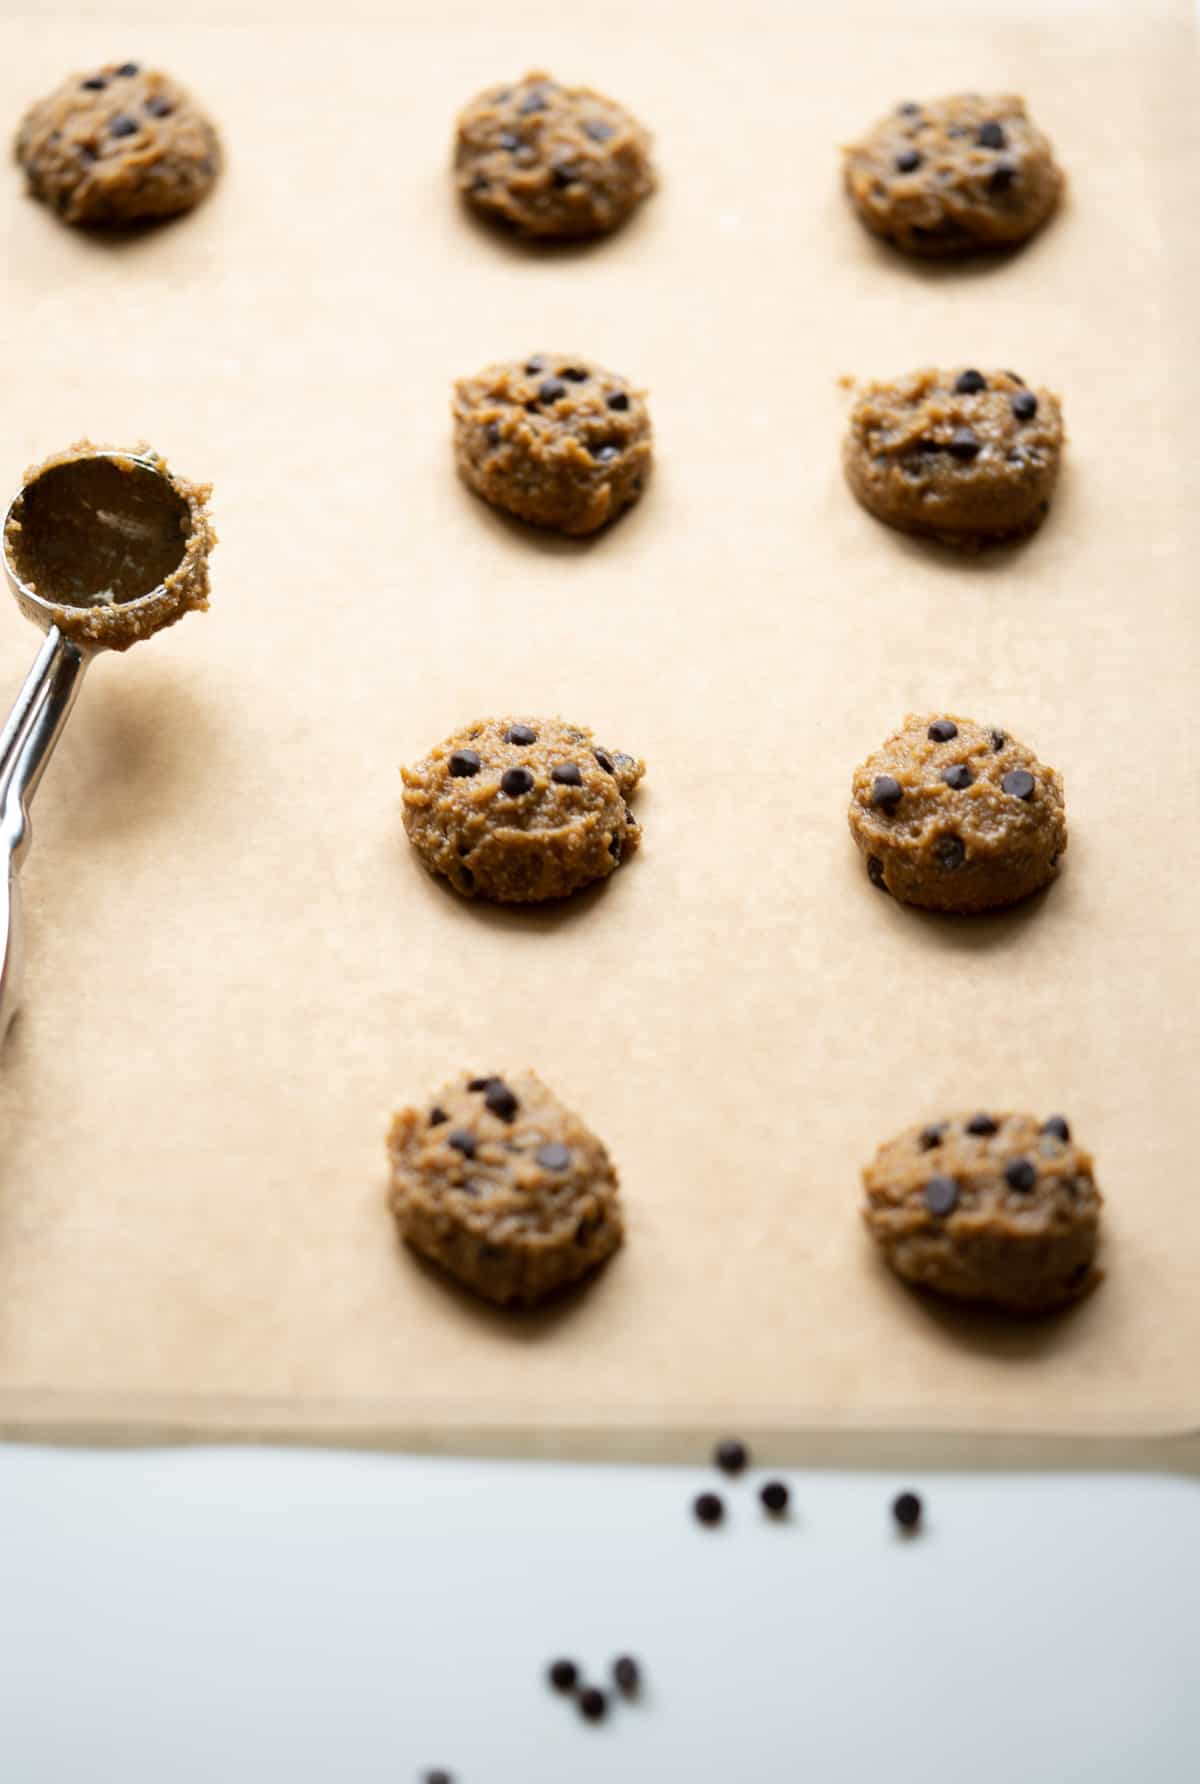 chocolate chip cookies on baking tray